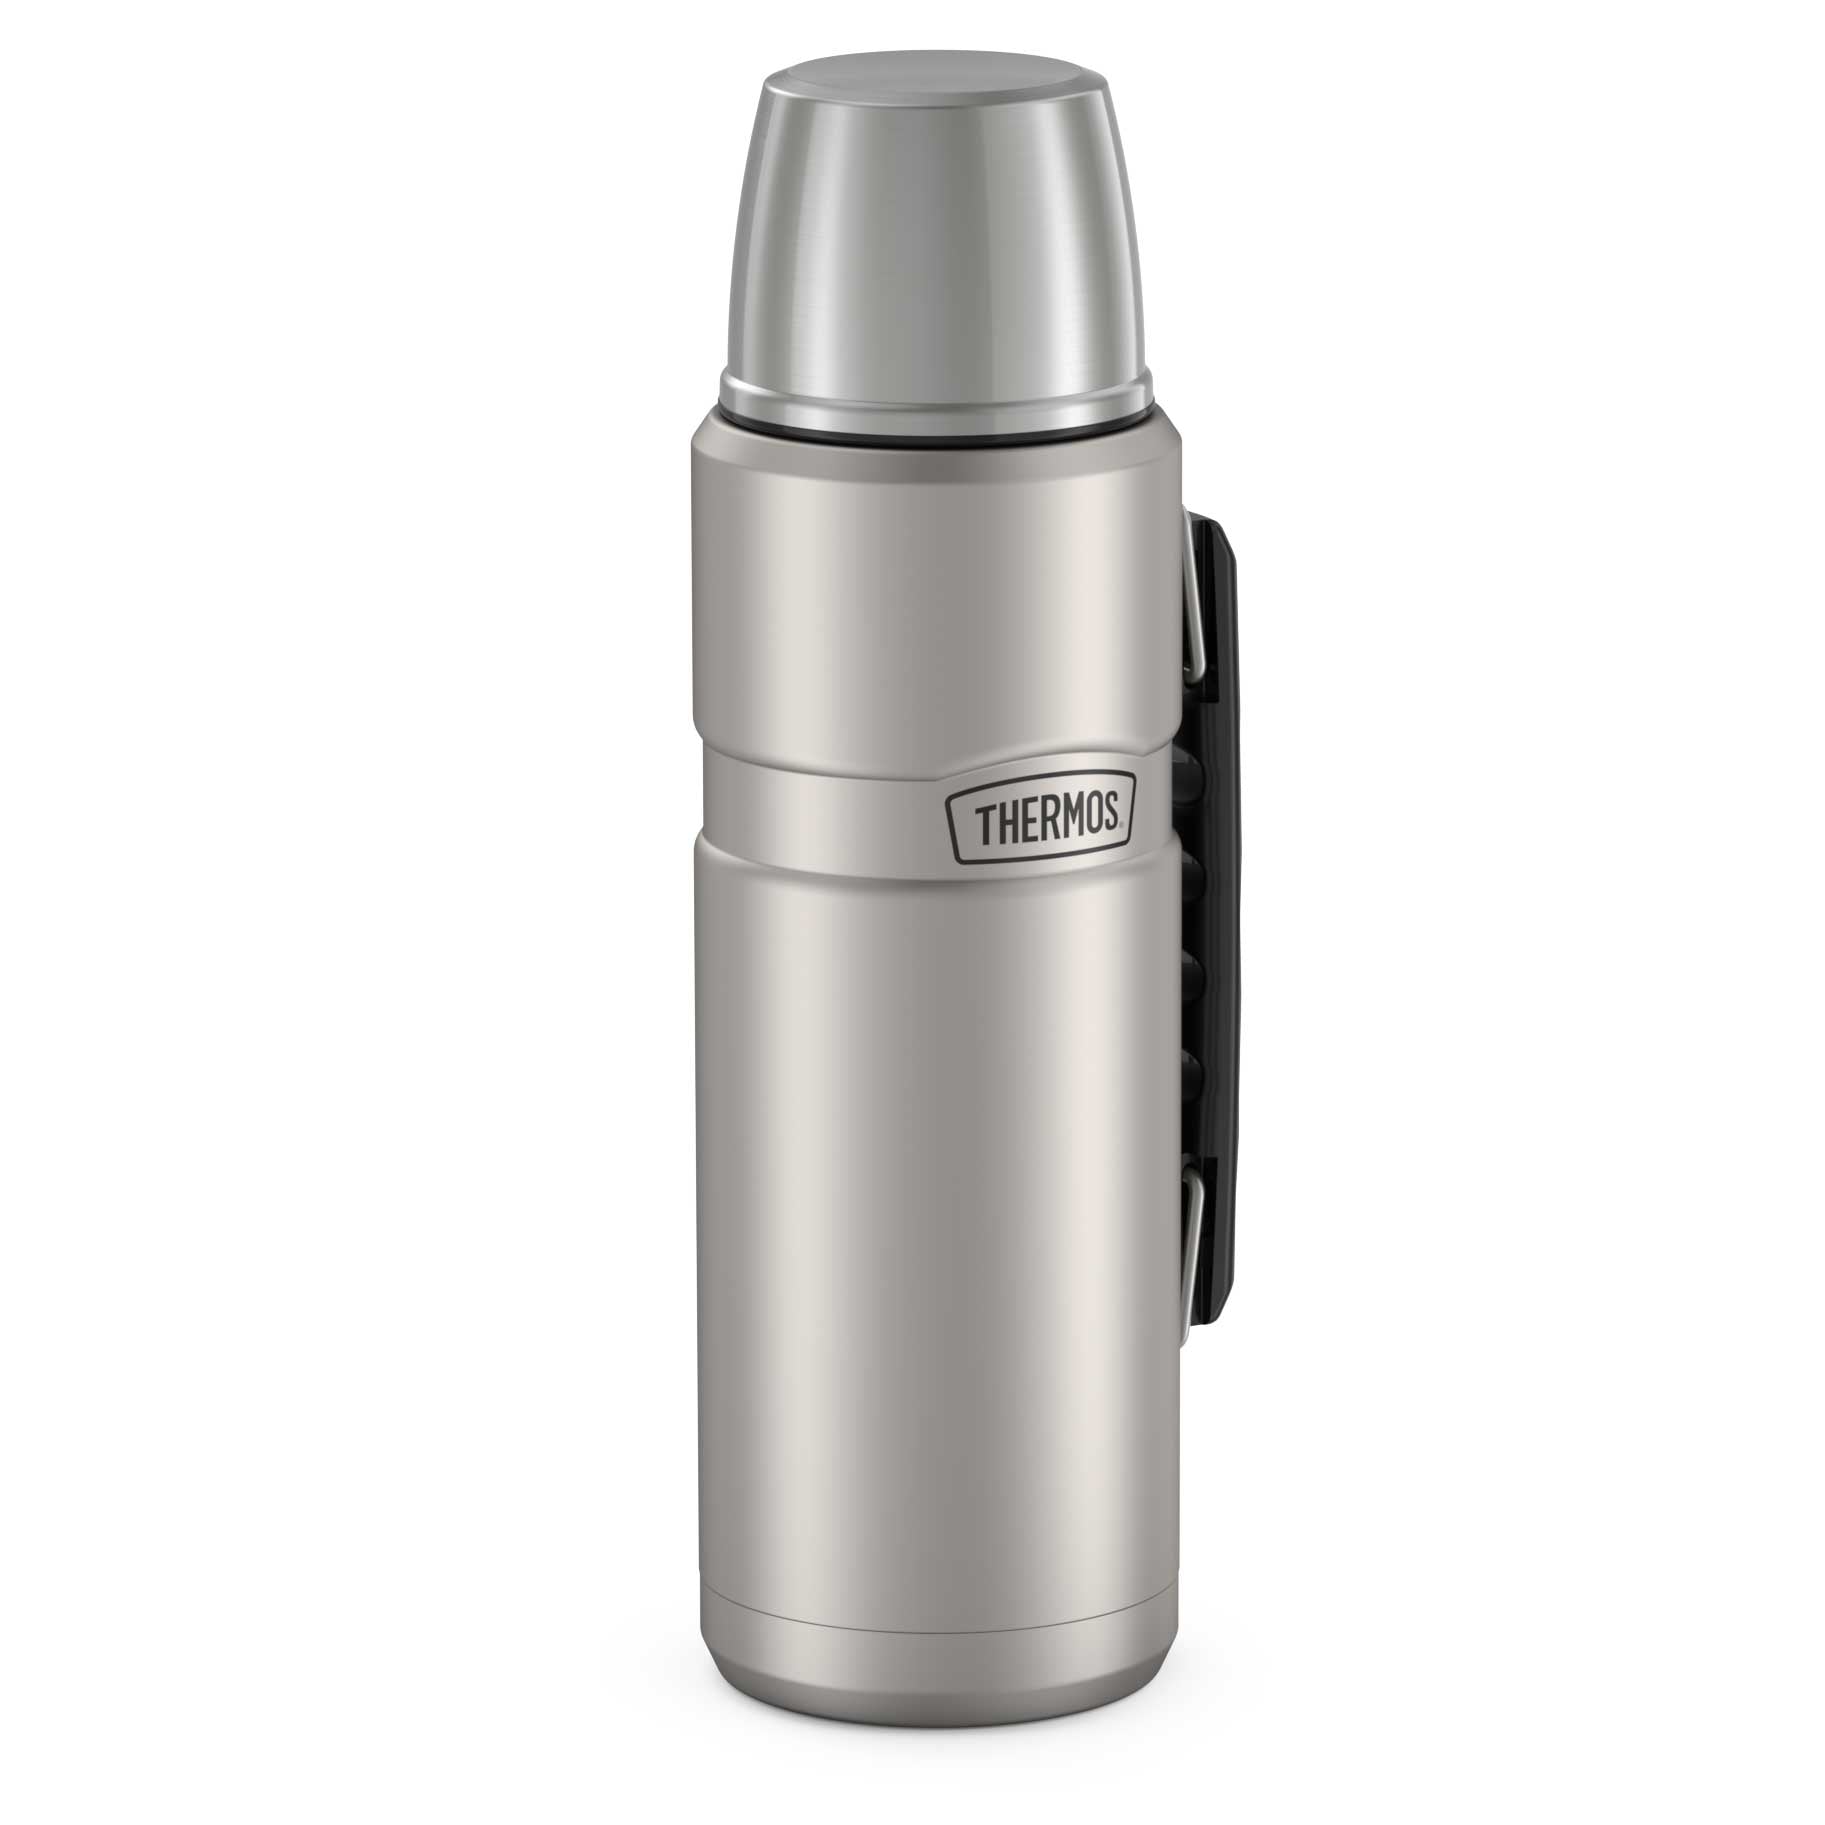 Thermos Flask Stainless Steel 2 Liters Camping Vacuum Insulated Hot Water  Bottle